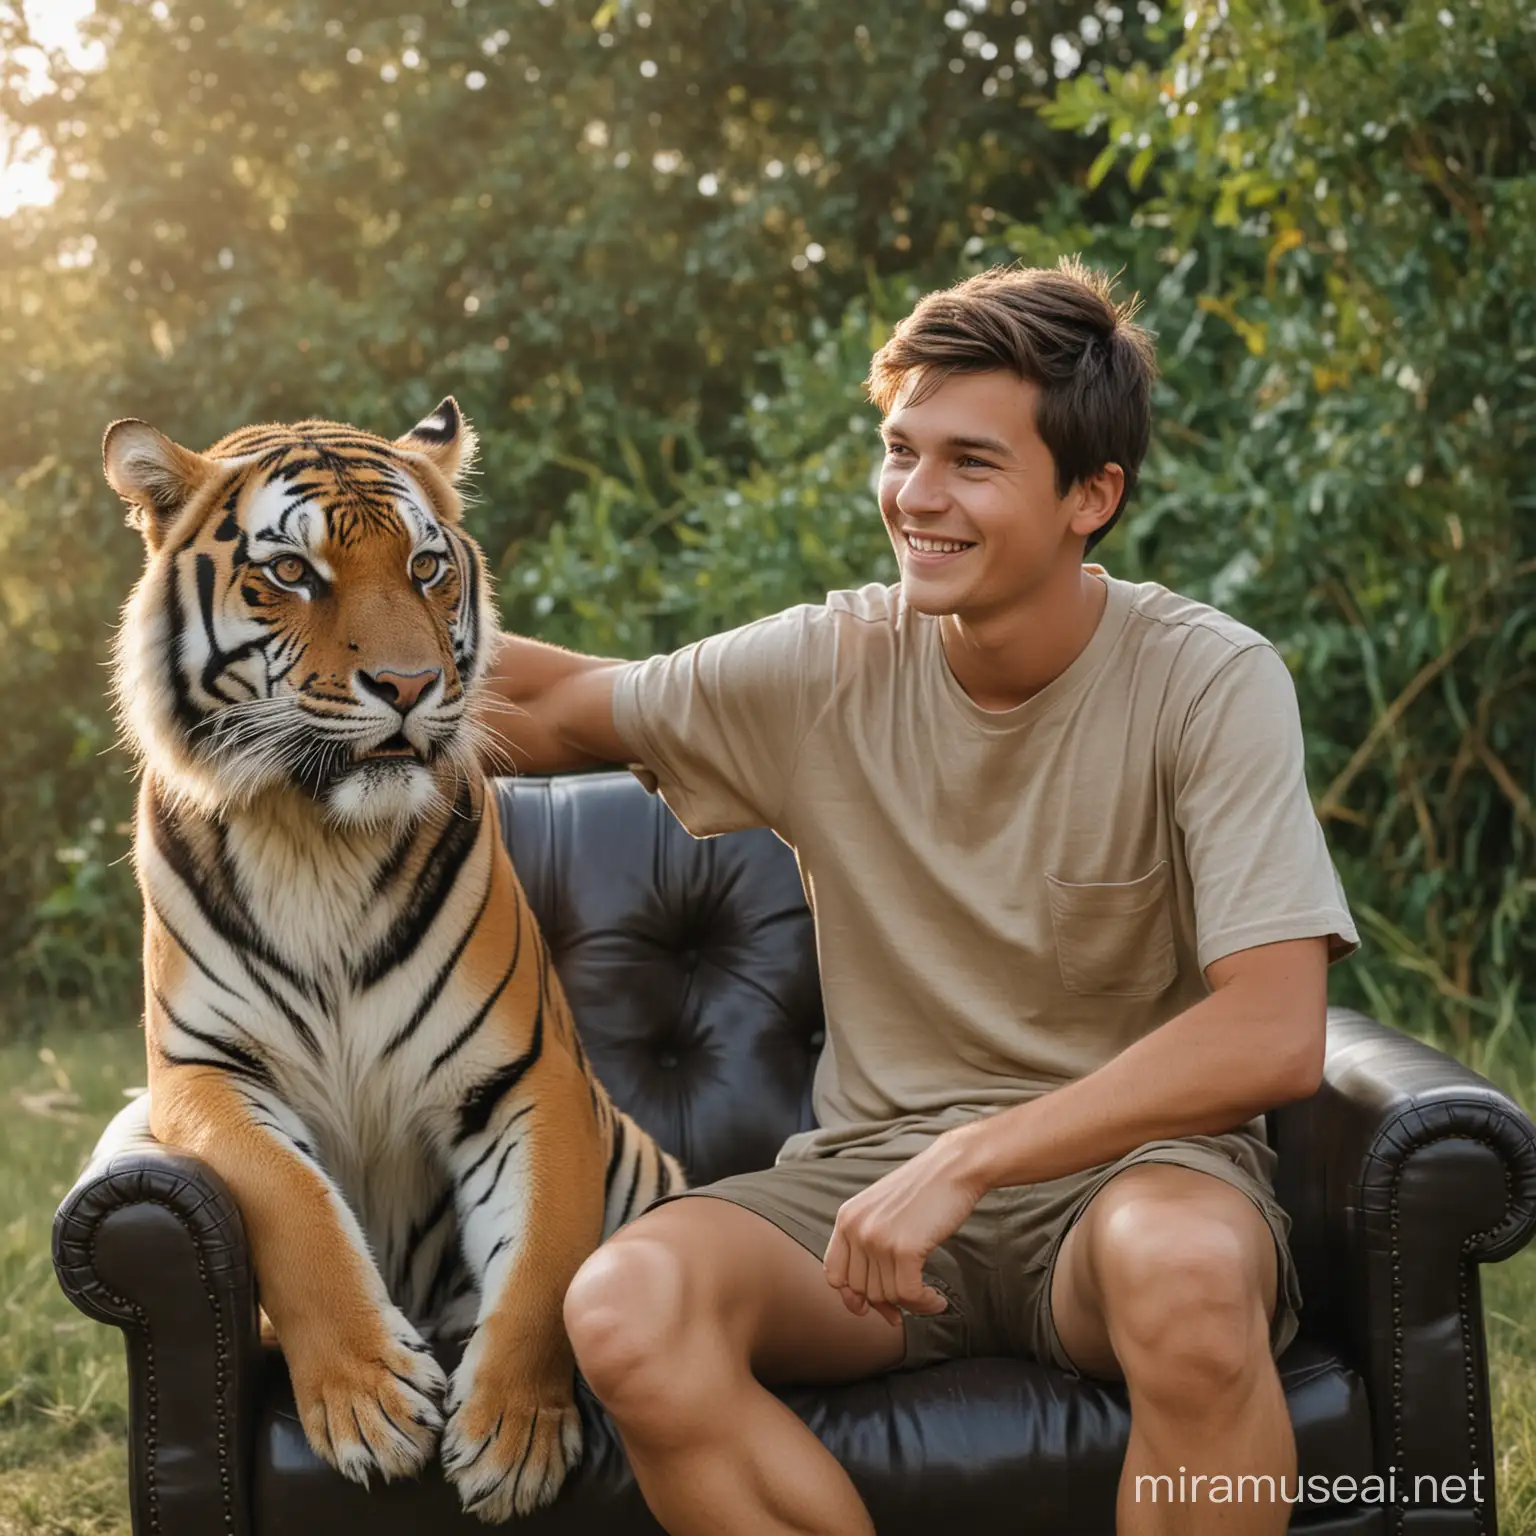 Smiling Young Man with Tiger Heartwarming 85mm Photography